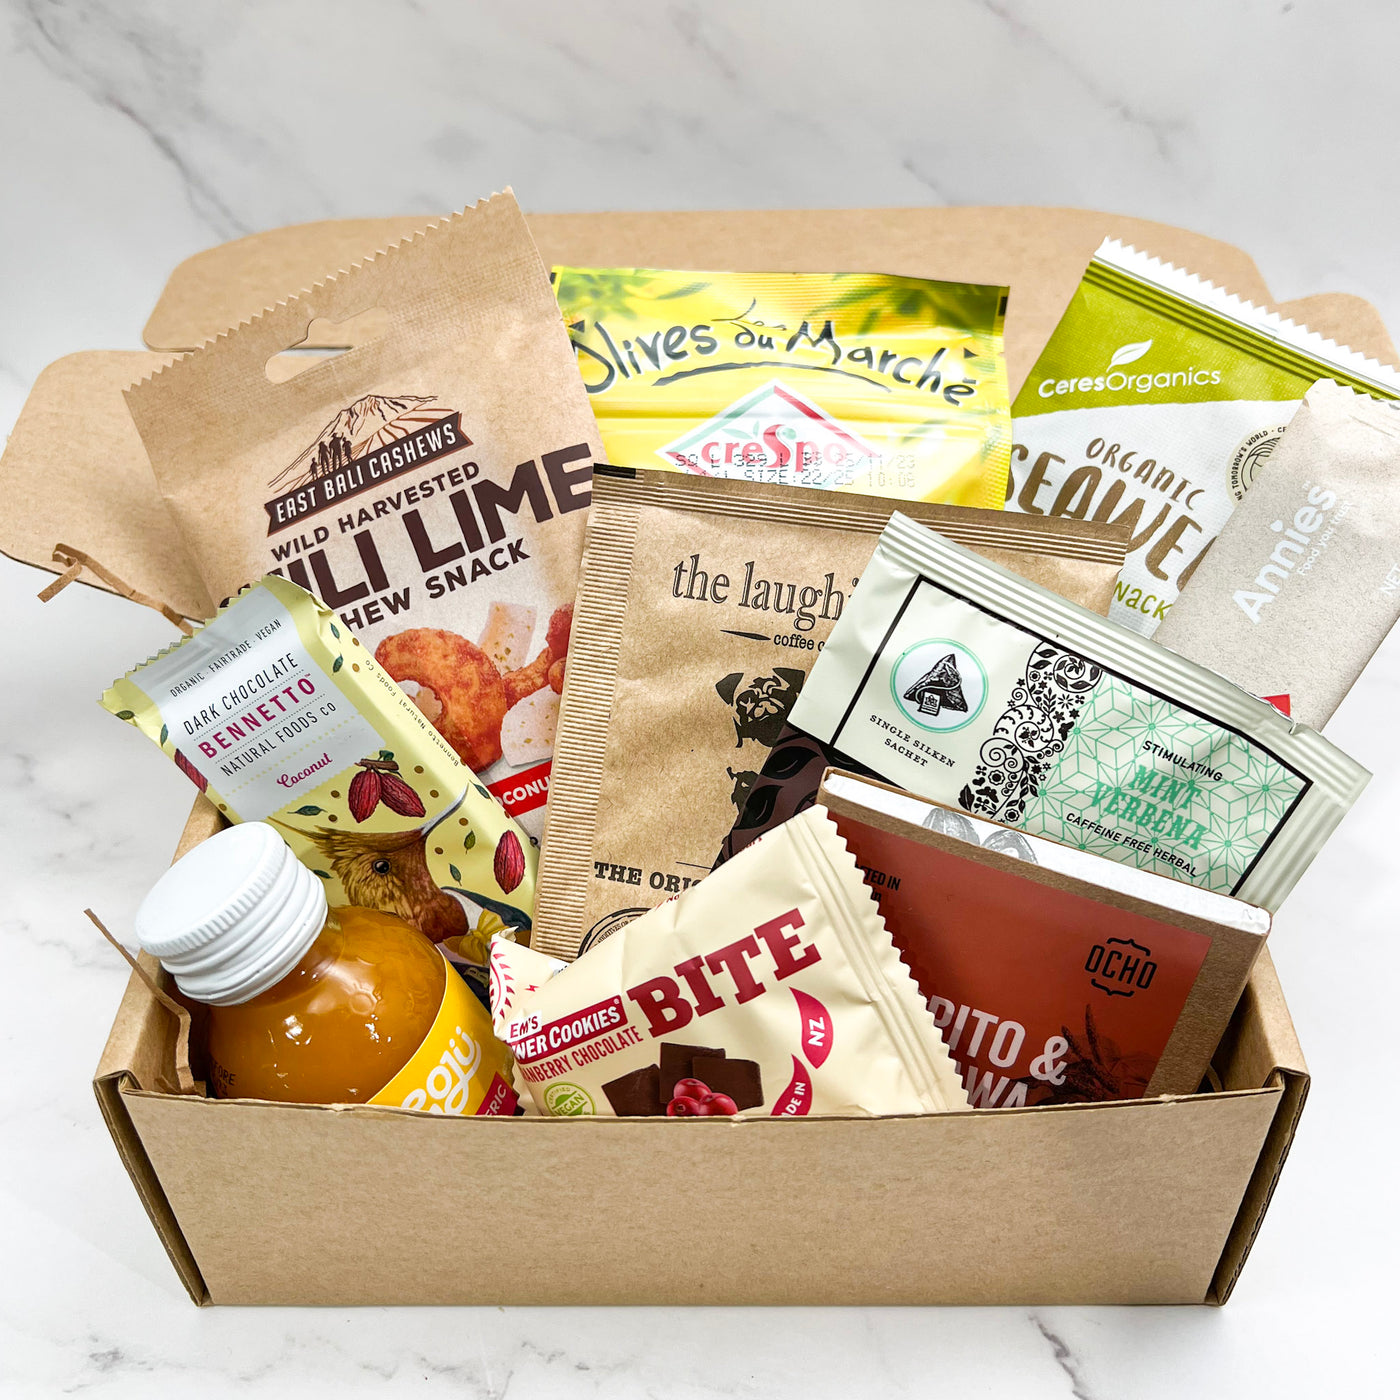 Send an Eco Gift Box | NZ Gift Delivery | Gift Saint Mindful Giving